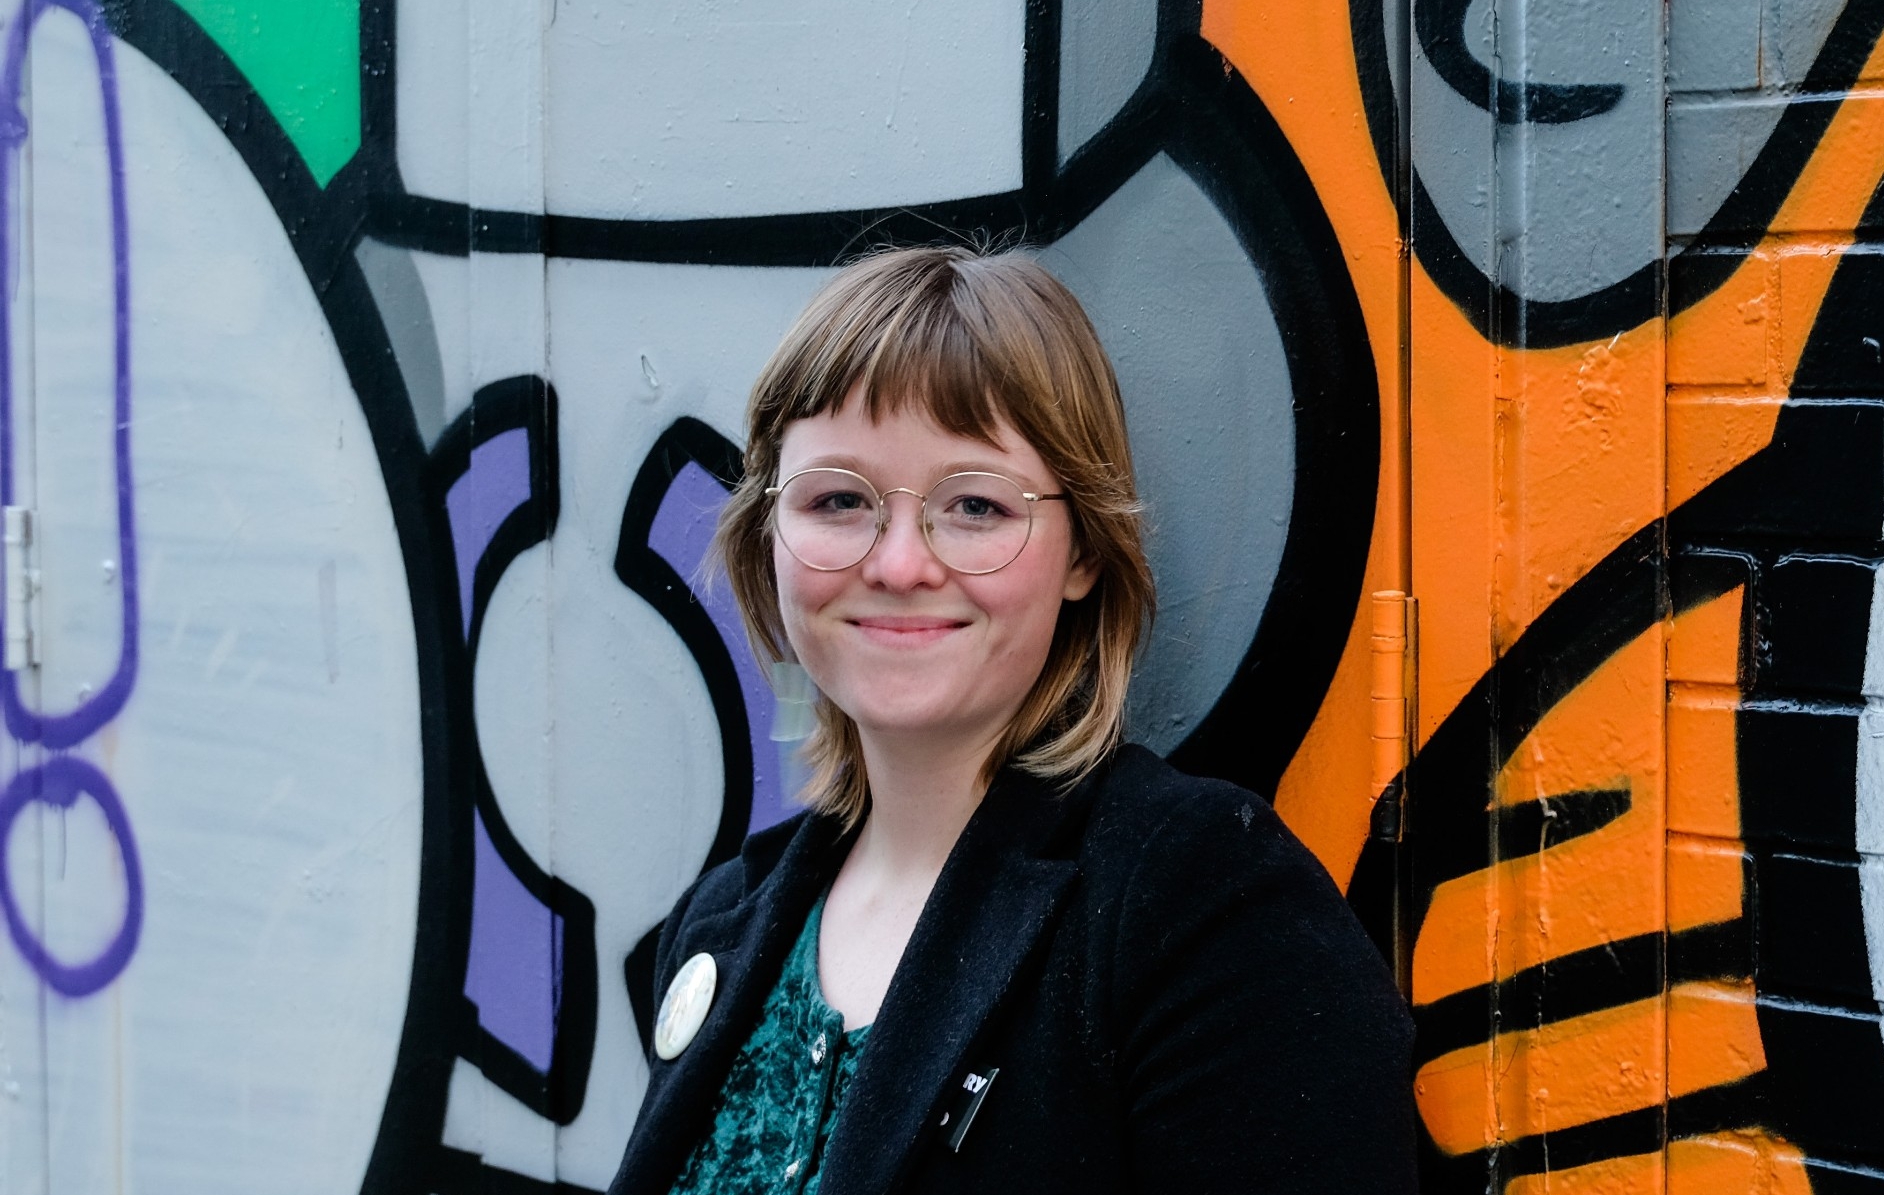 Master of Publishing student Zoe Mix smiles as she poses in front of a colourful and vibrant graffiti wall. She is wearing glasses and is donning a black jacket over a dark green velvet top. 